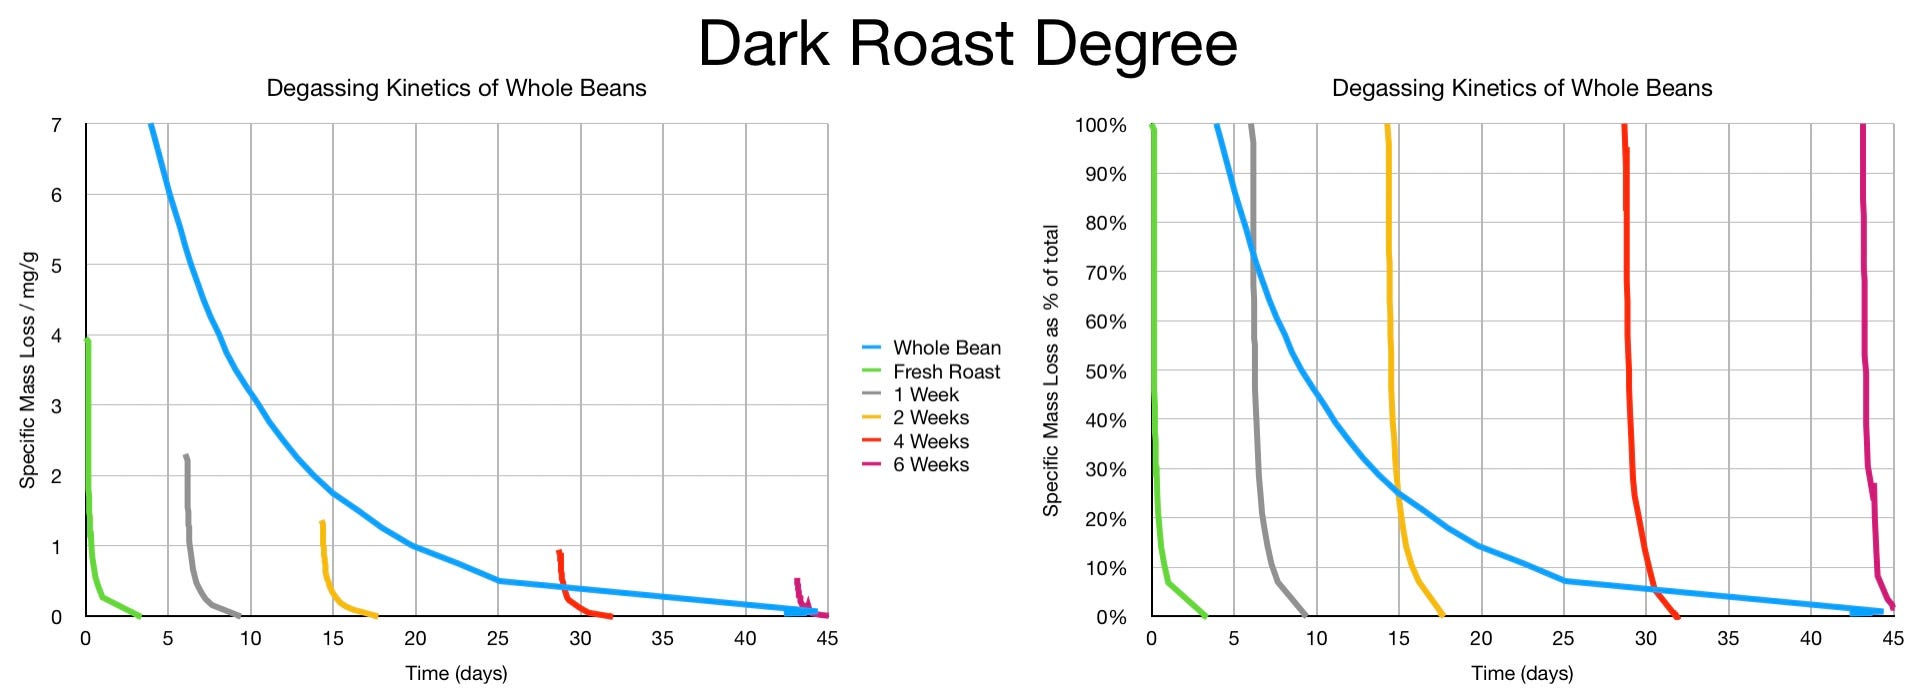 What is coffee bean degassing and how does it impact my brewed coffee and  espresso? — Reverie Coffee Roasters